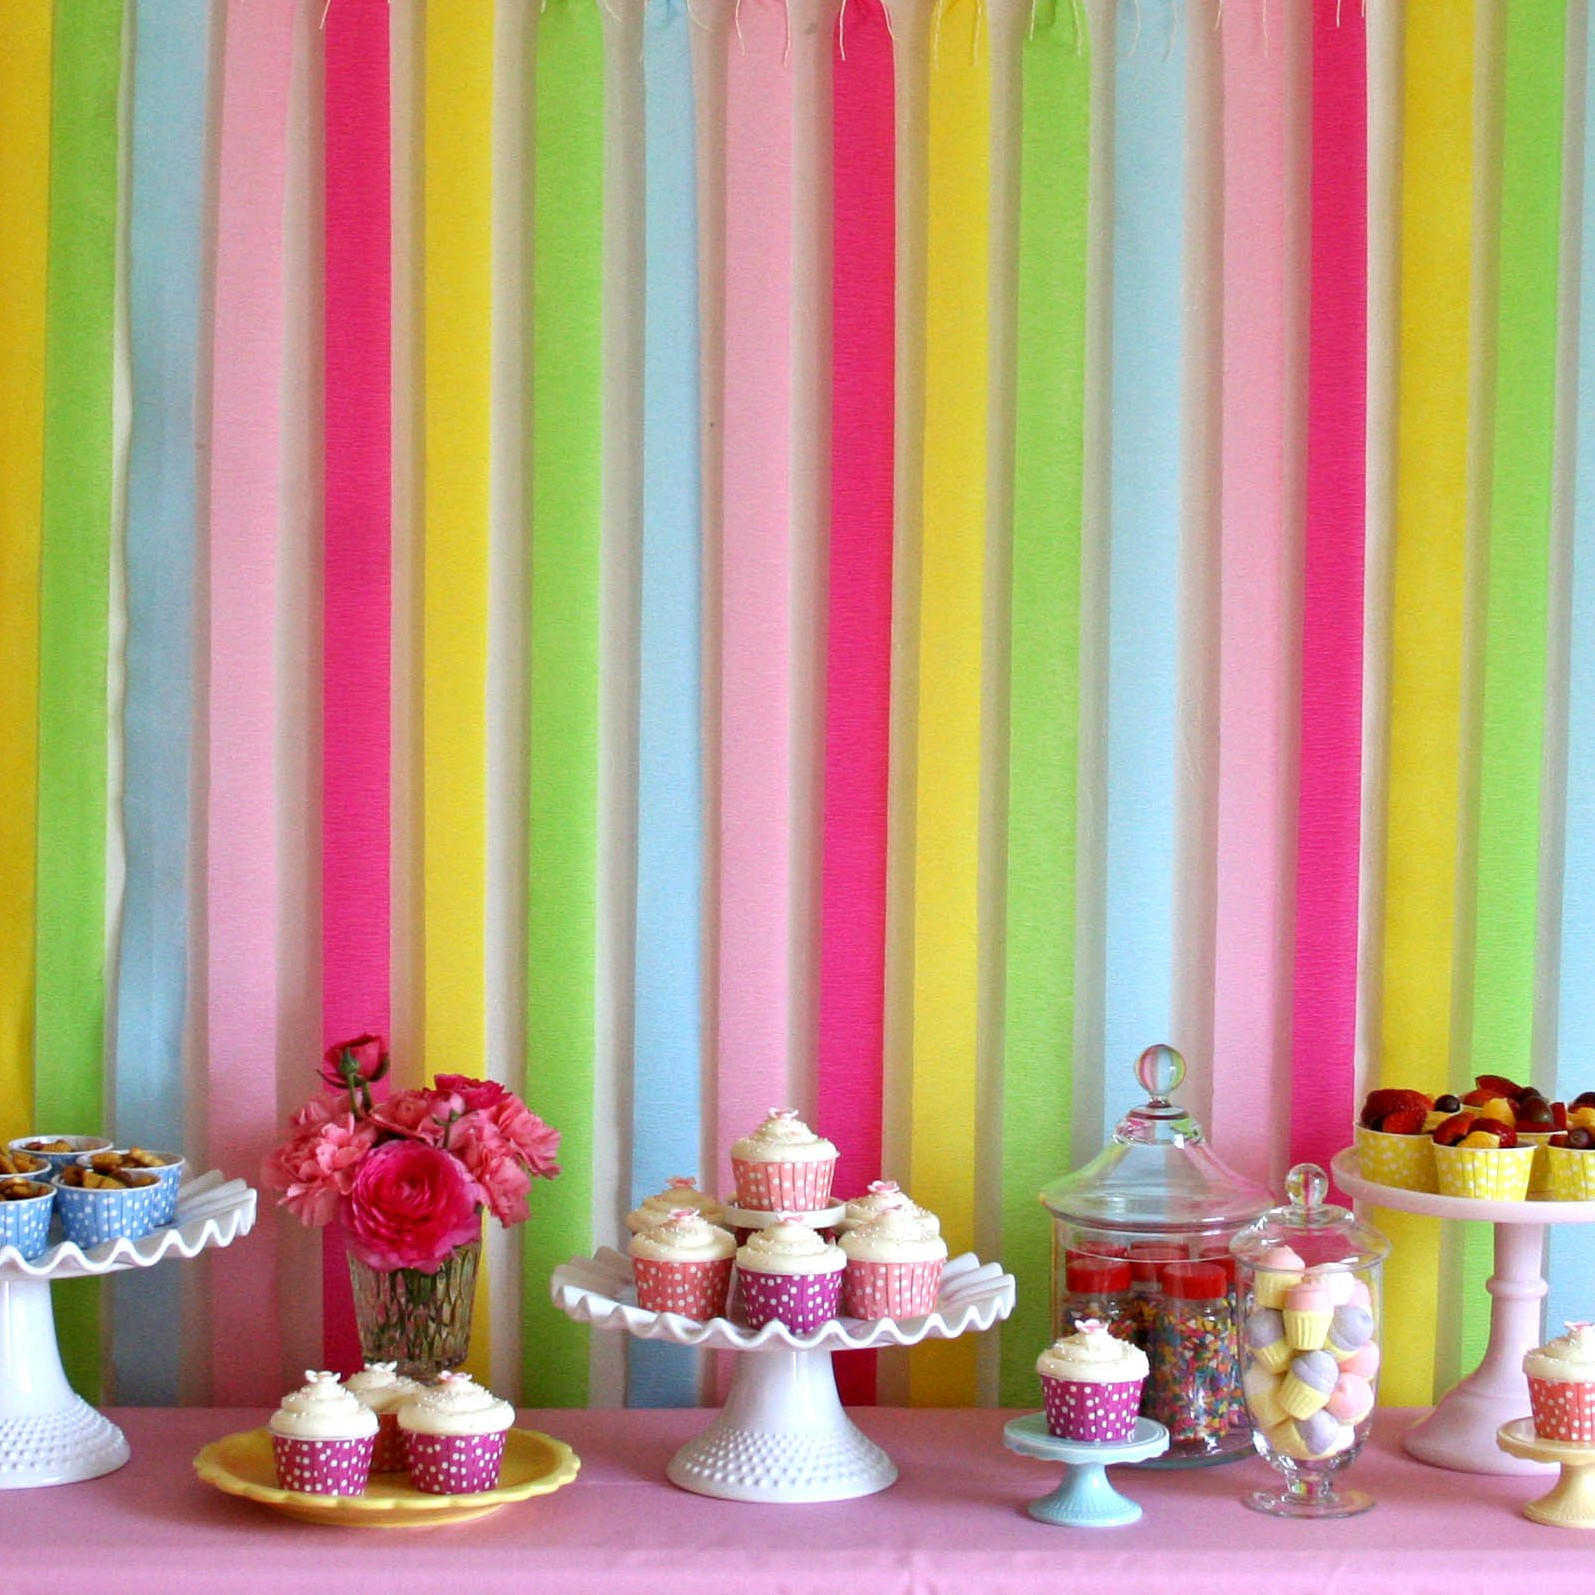 How To Decorate Birthday Party
 Grace s Cake Decorating Party Glorious Treats